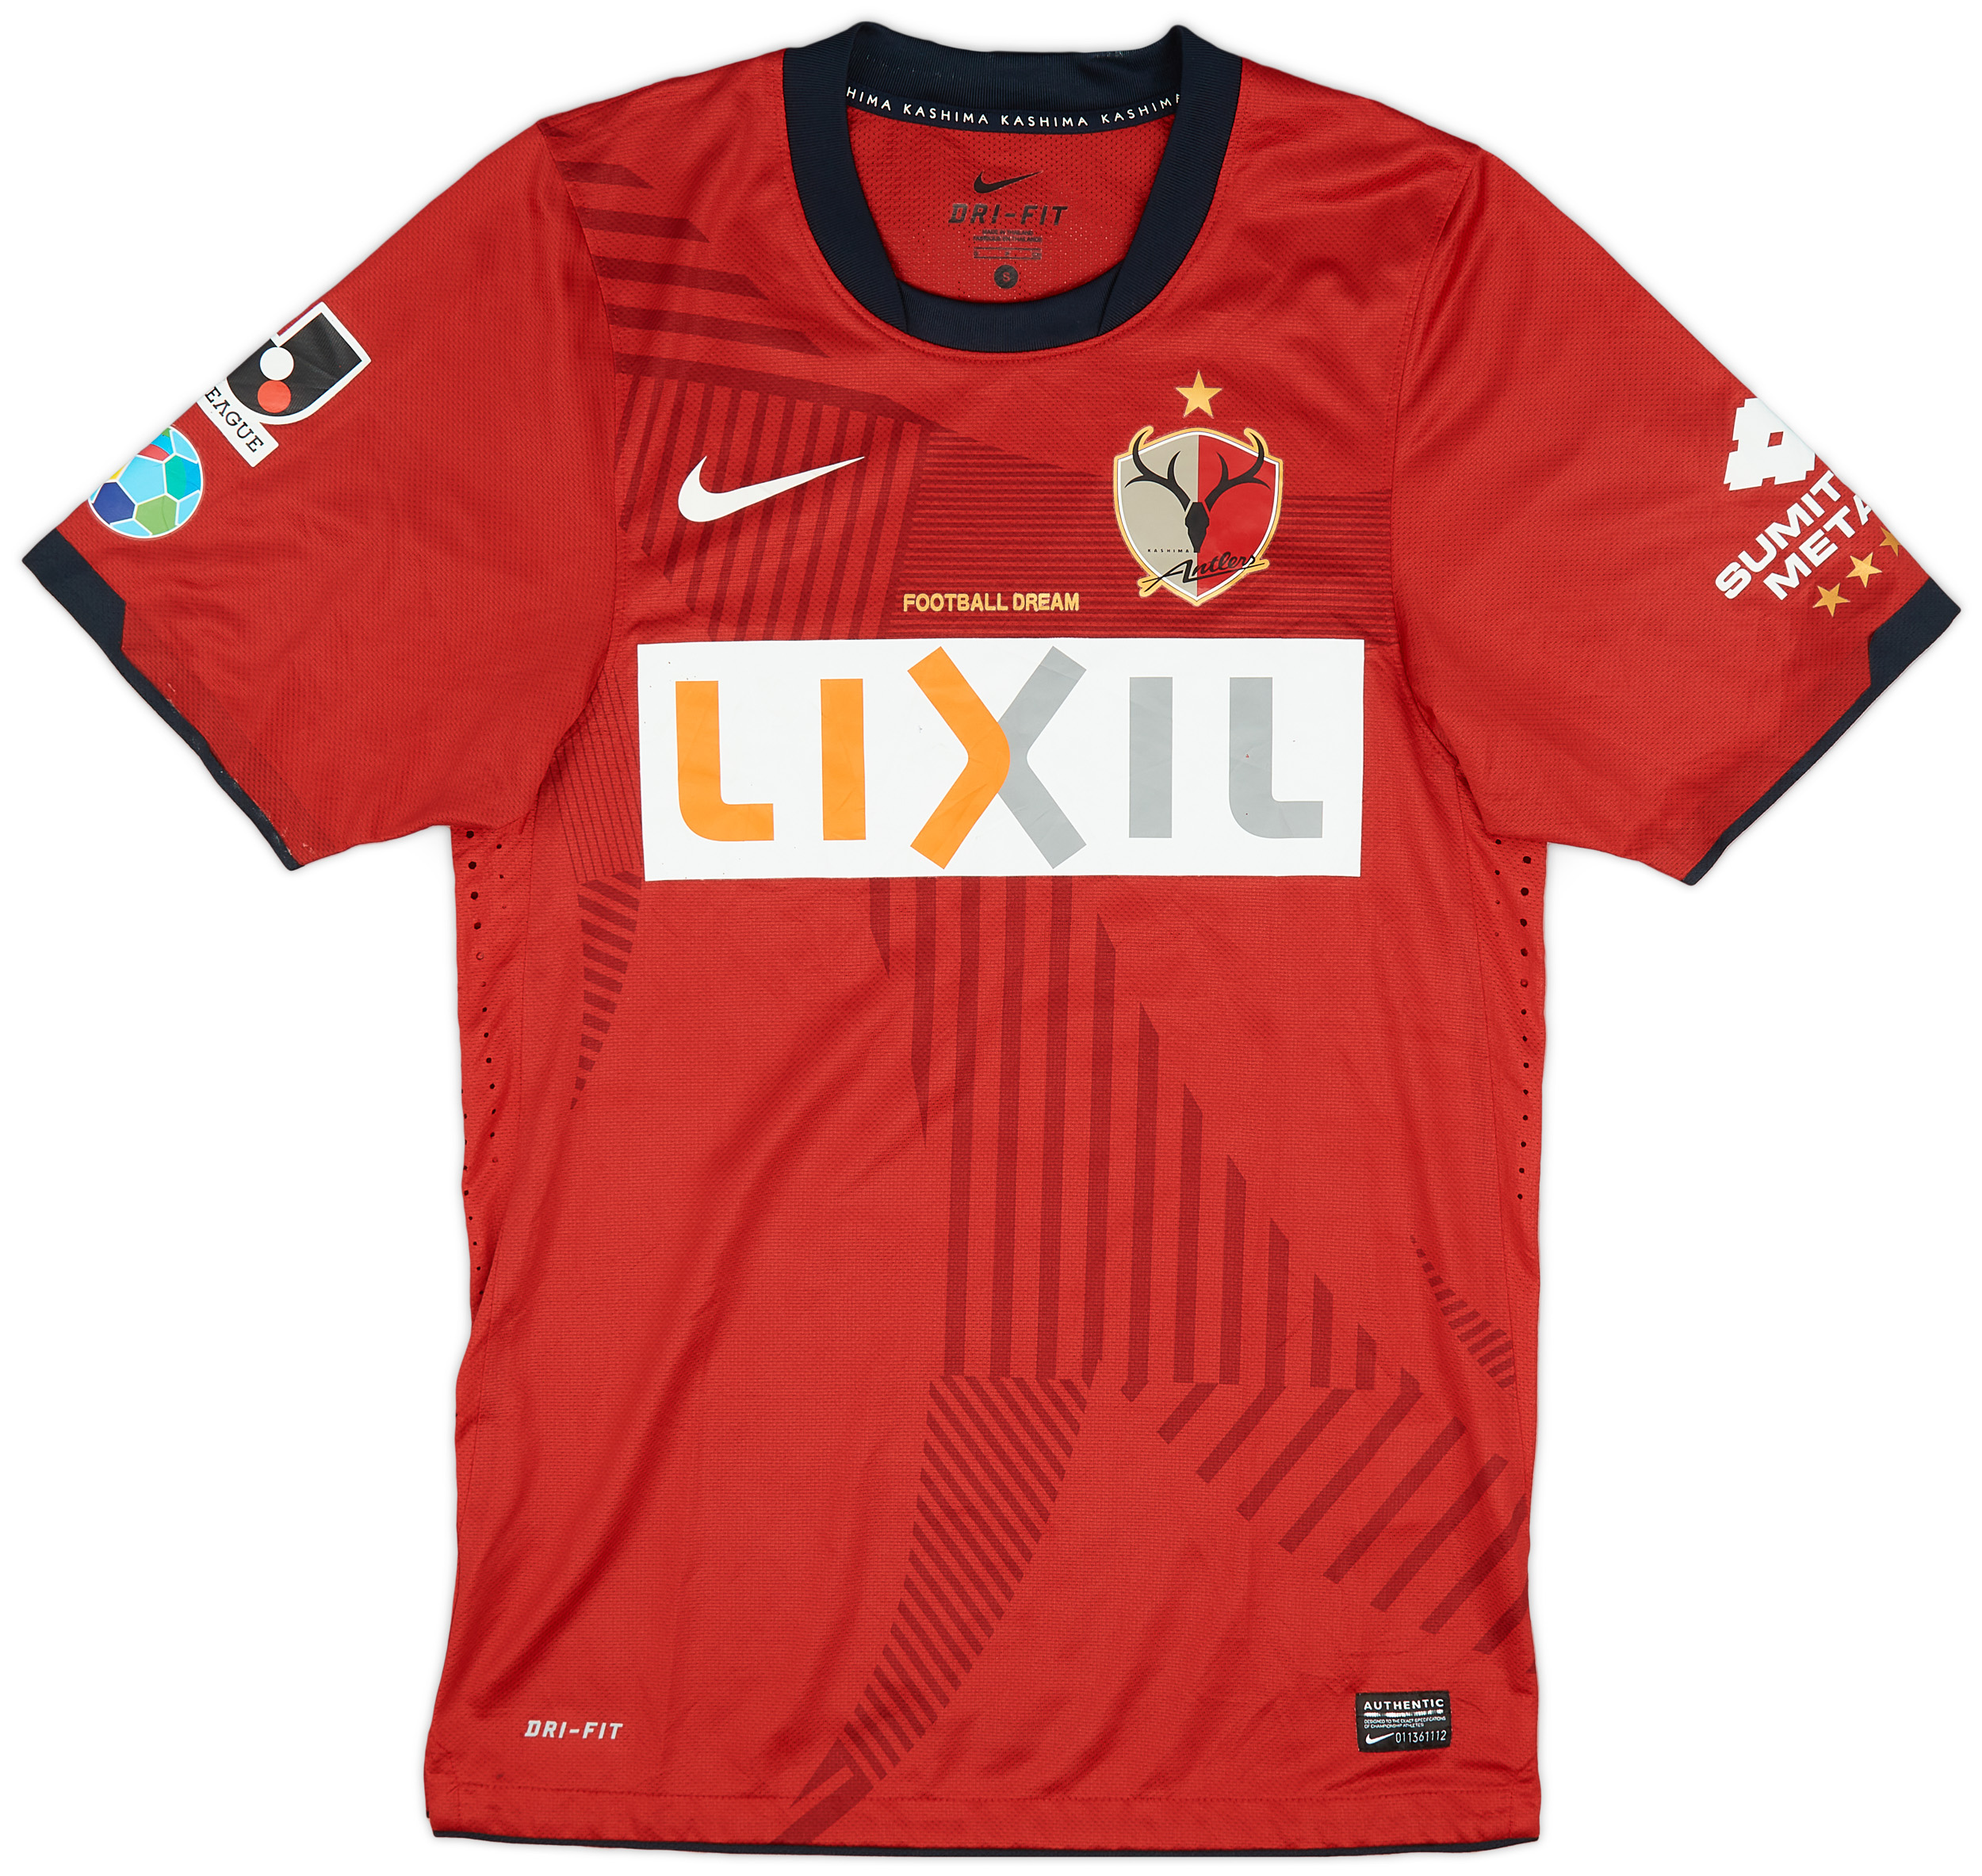 2011 Kashima Antlers Authentic Home Shirt - 7/10 - ()